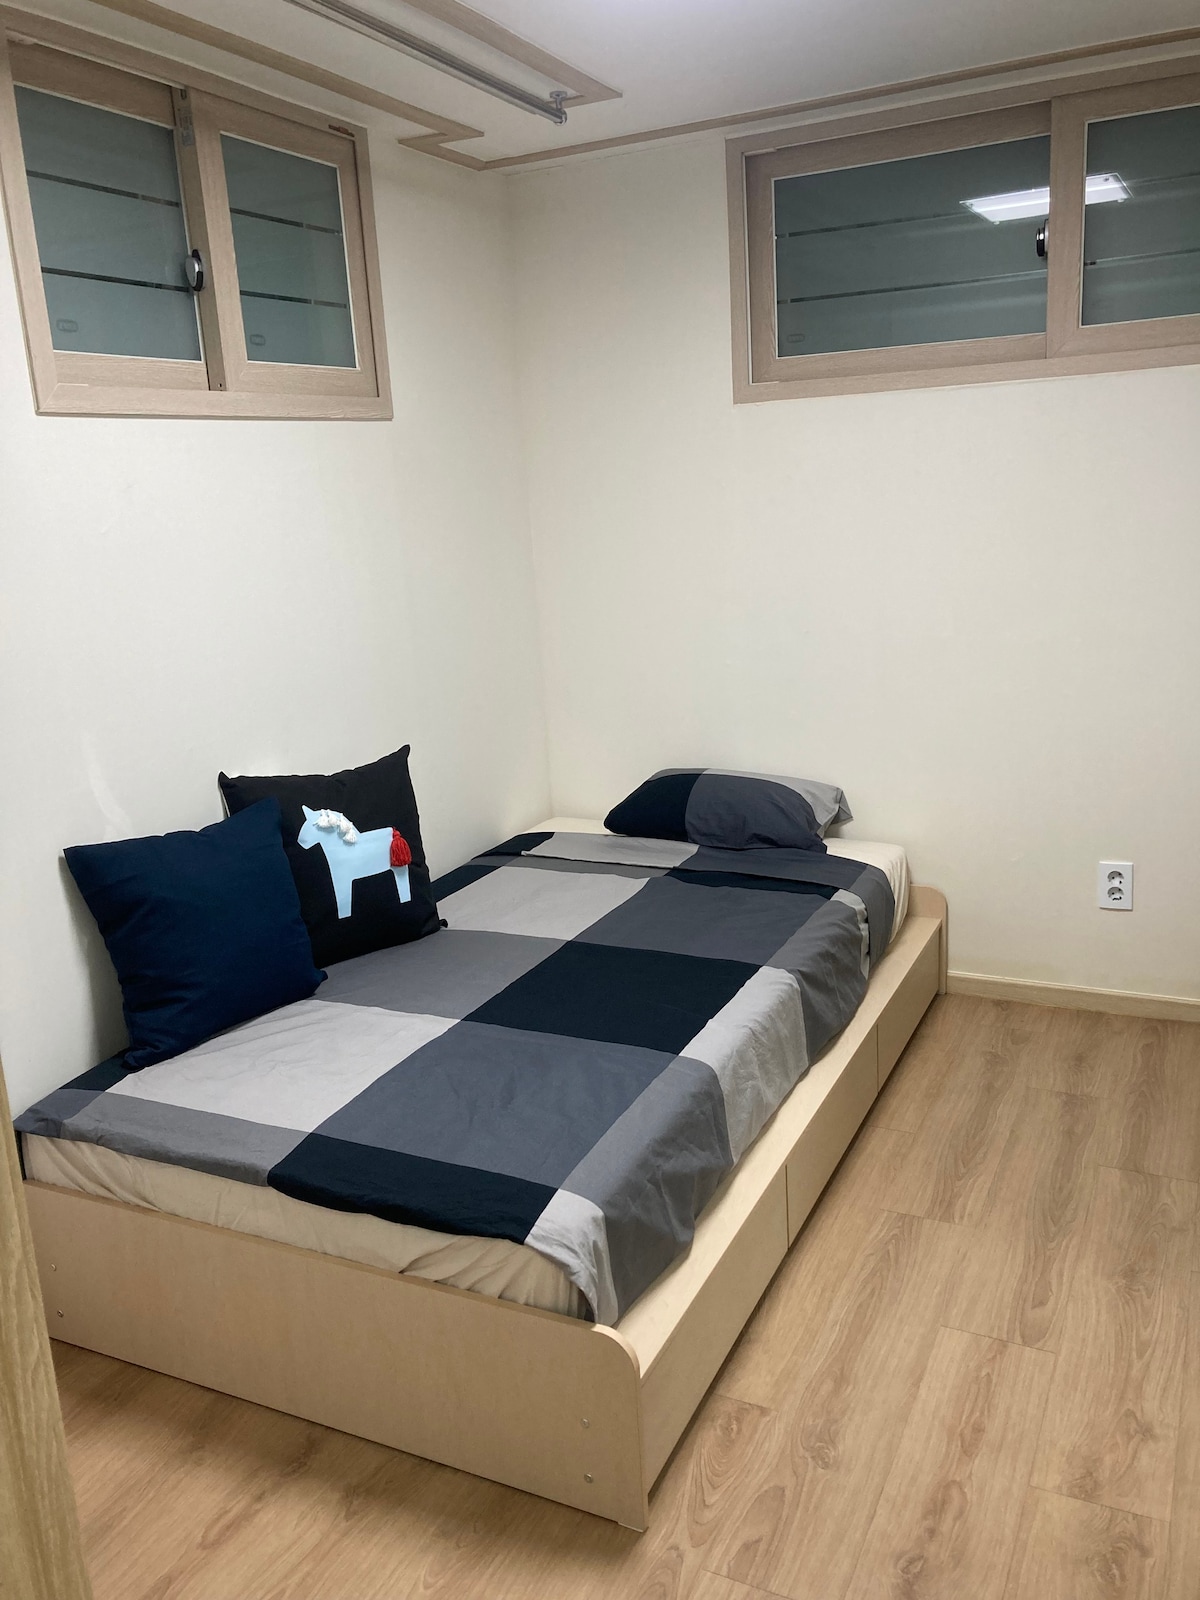 Seoul Furnished Monthly Rentals and Extended Stays | Airbnb